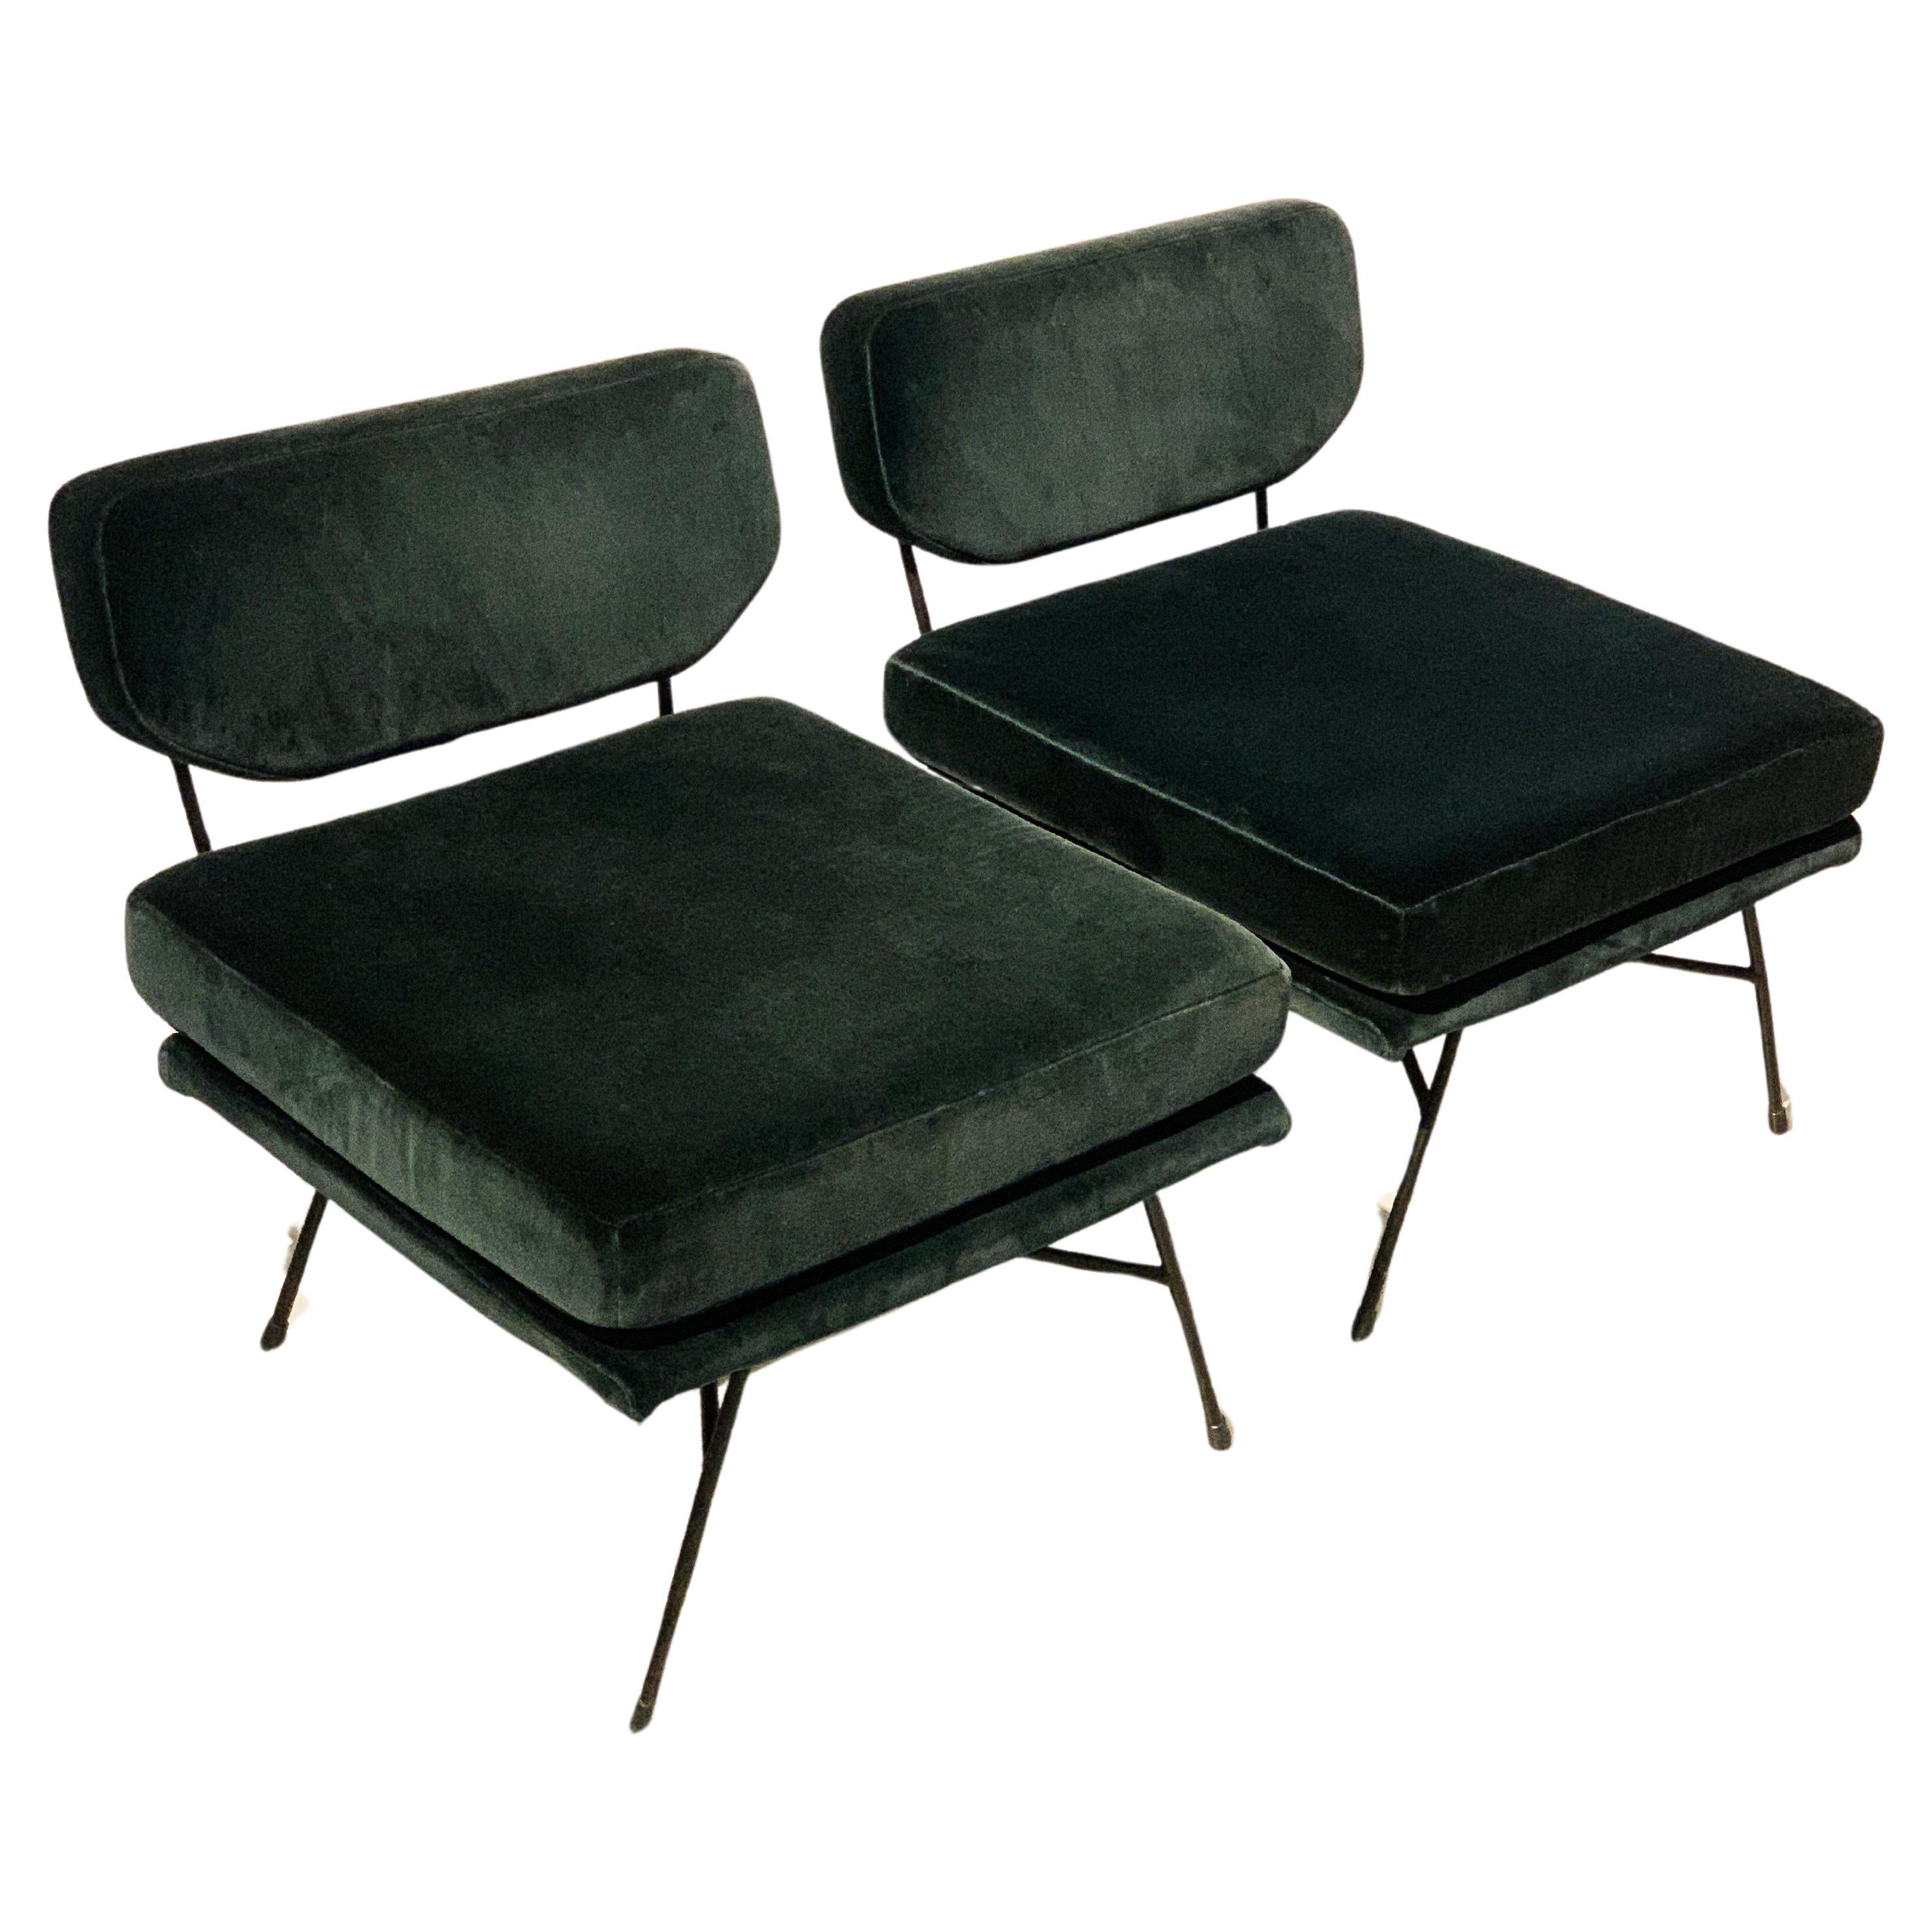 Pair 'Elettra' Lounge Chairs by BBPR, Arflex, Italy 1953, Compasso D'Oro 1954 For Sale